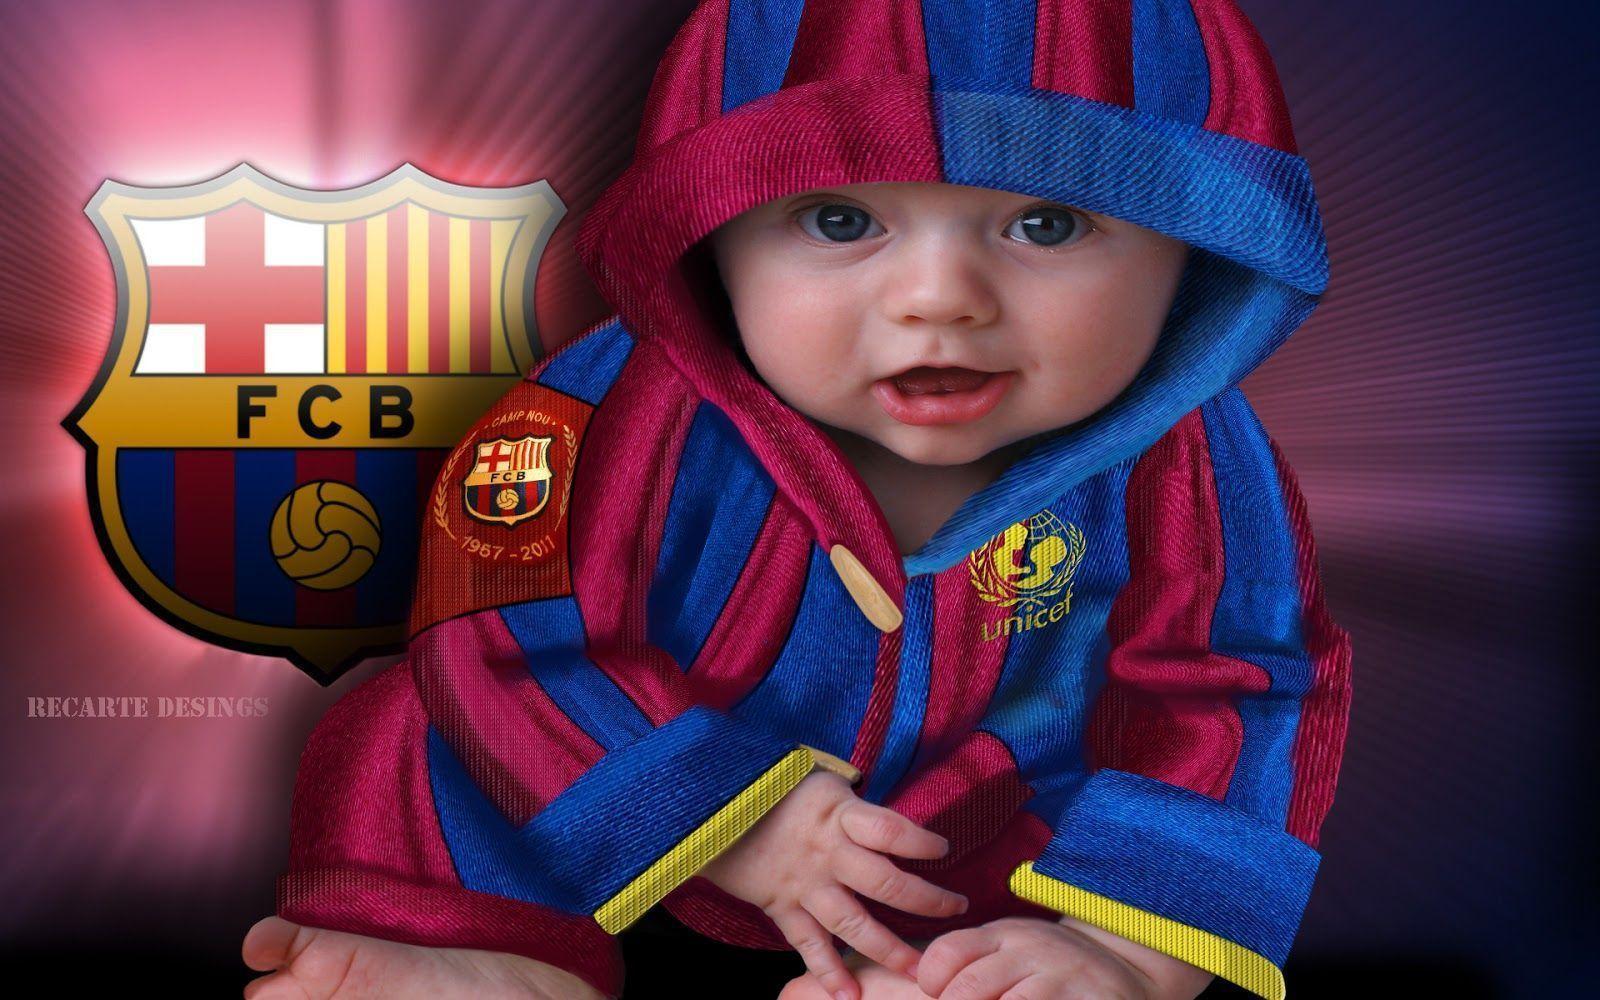 FC Barcelona Baby Wallpaper. Download High Quality Resolution